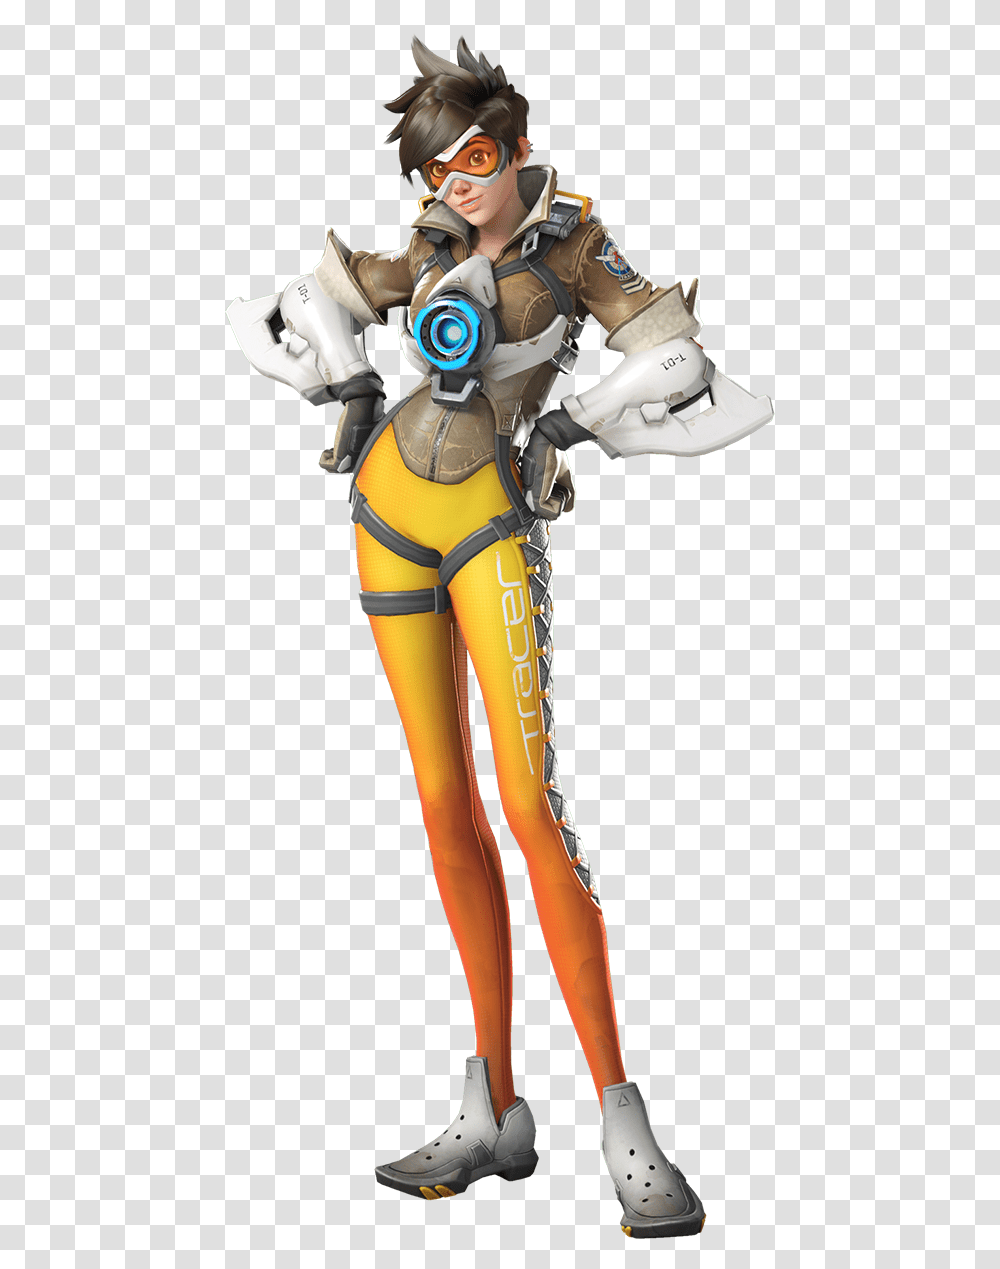 Quick Edit Old Tracer Vs New Tracer, Person, Figurine, Clothing, Costume Transparent Png